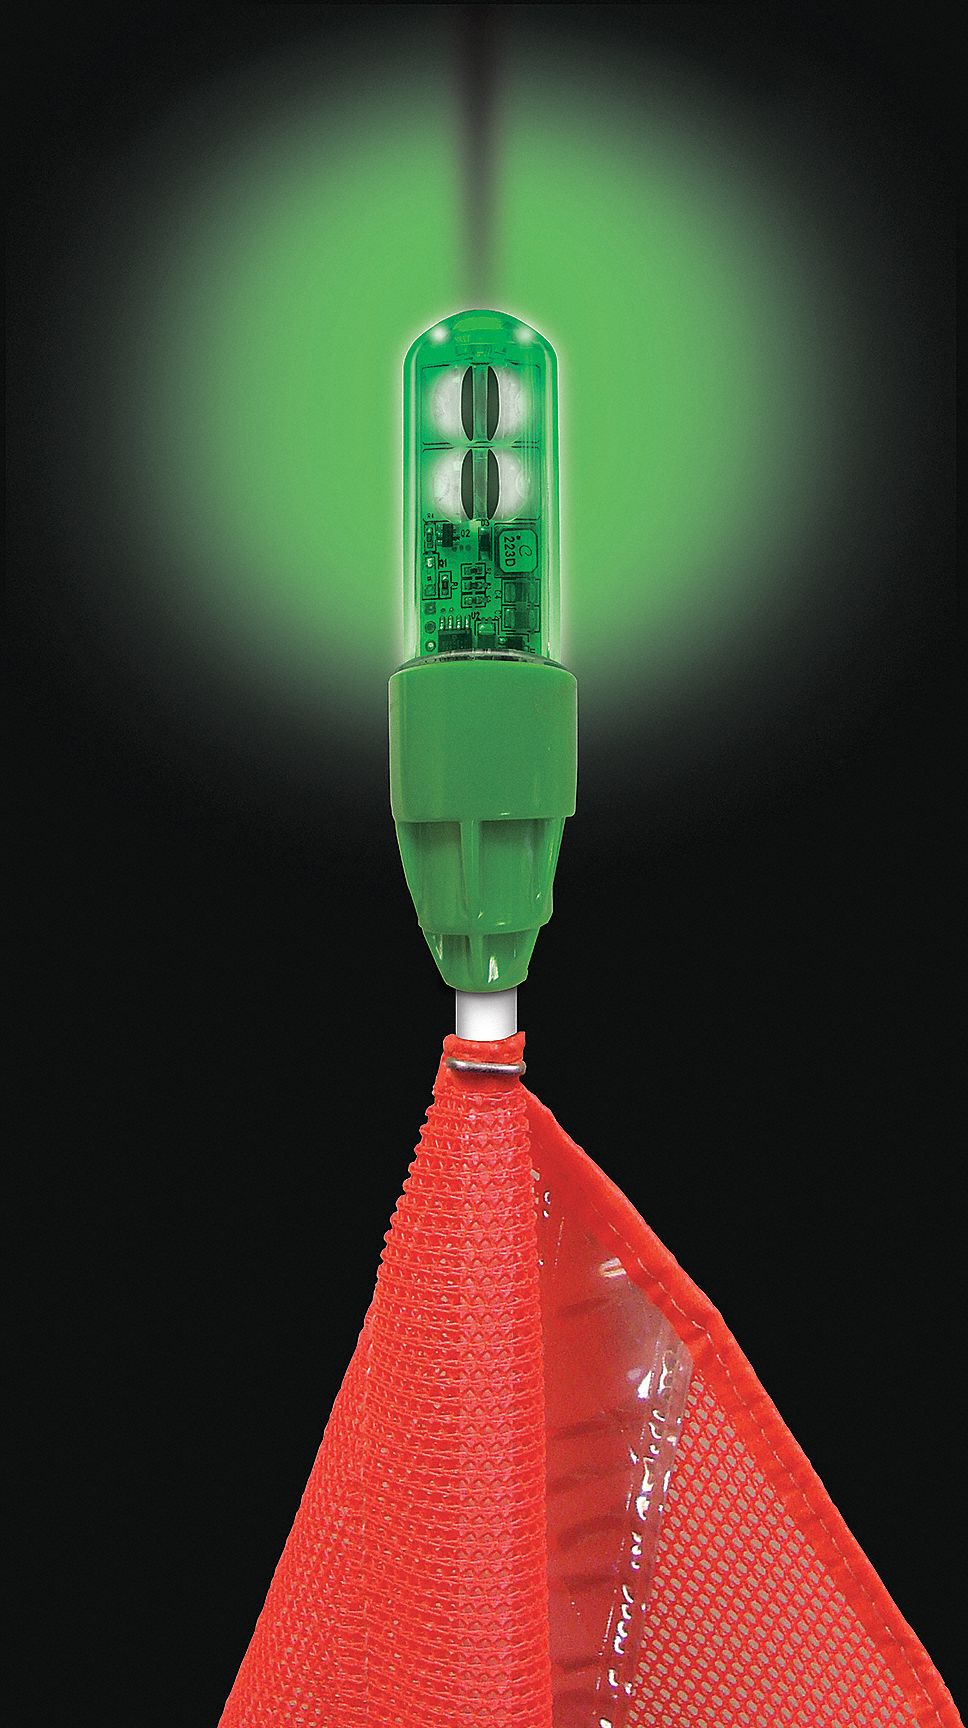 Warning Whip Light: LED, Solid, 2.4 to 12 W, Green, 3/4 in Ht, 1 in Wd